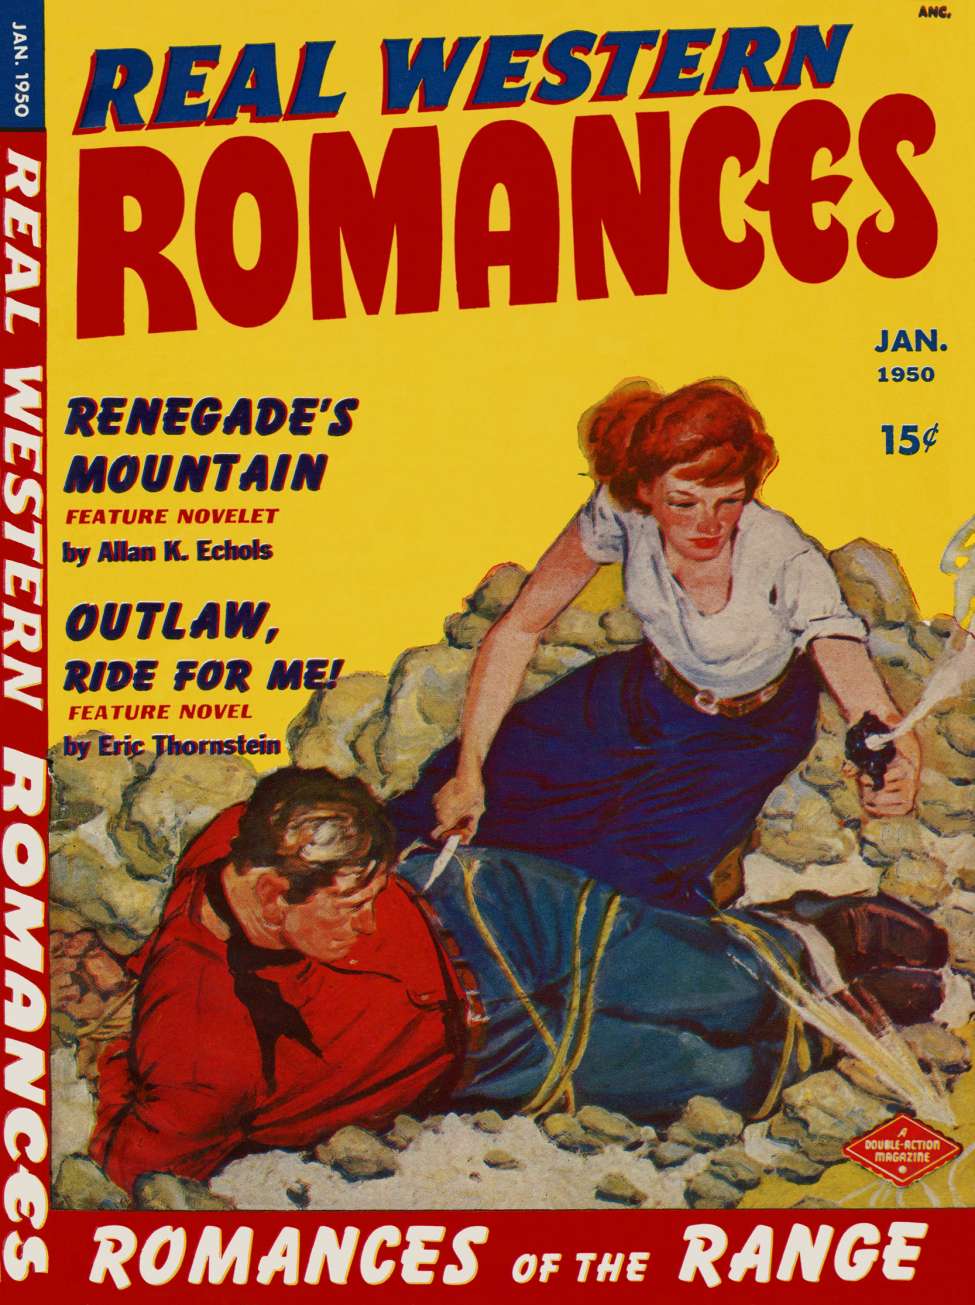 Book Cover For Real Western Romances v1 2